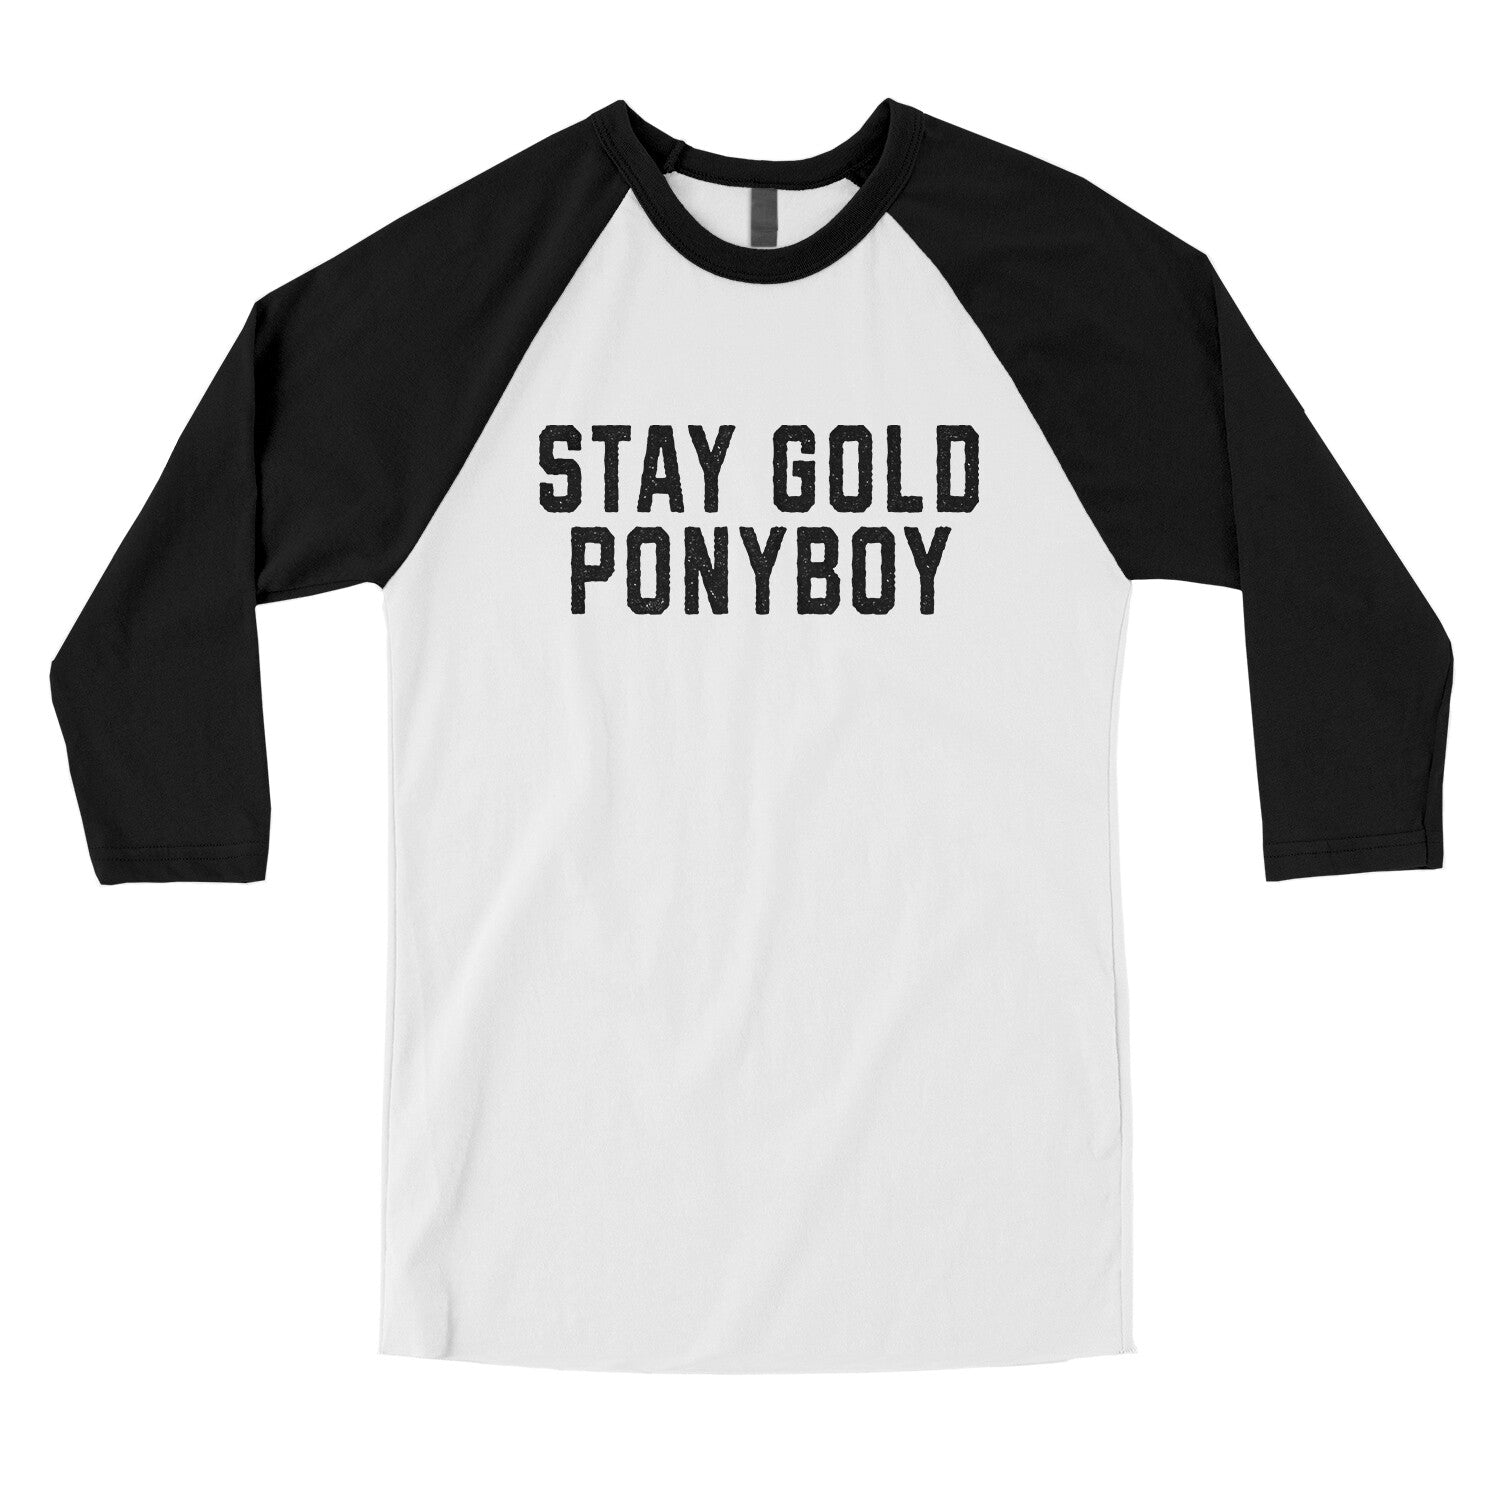 Stay Gold Ponyboy in White with Black Color